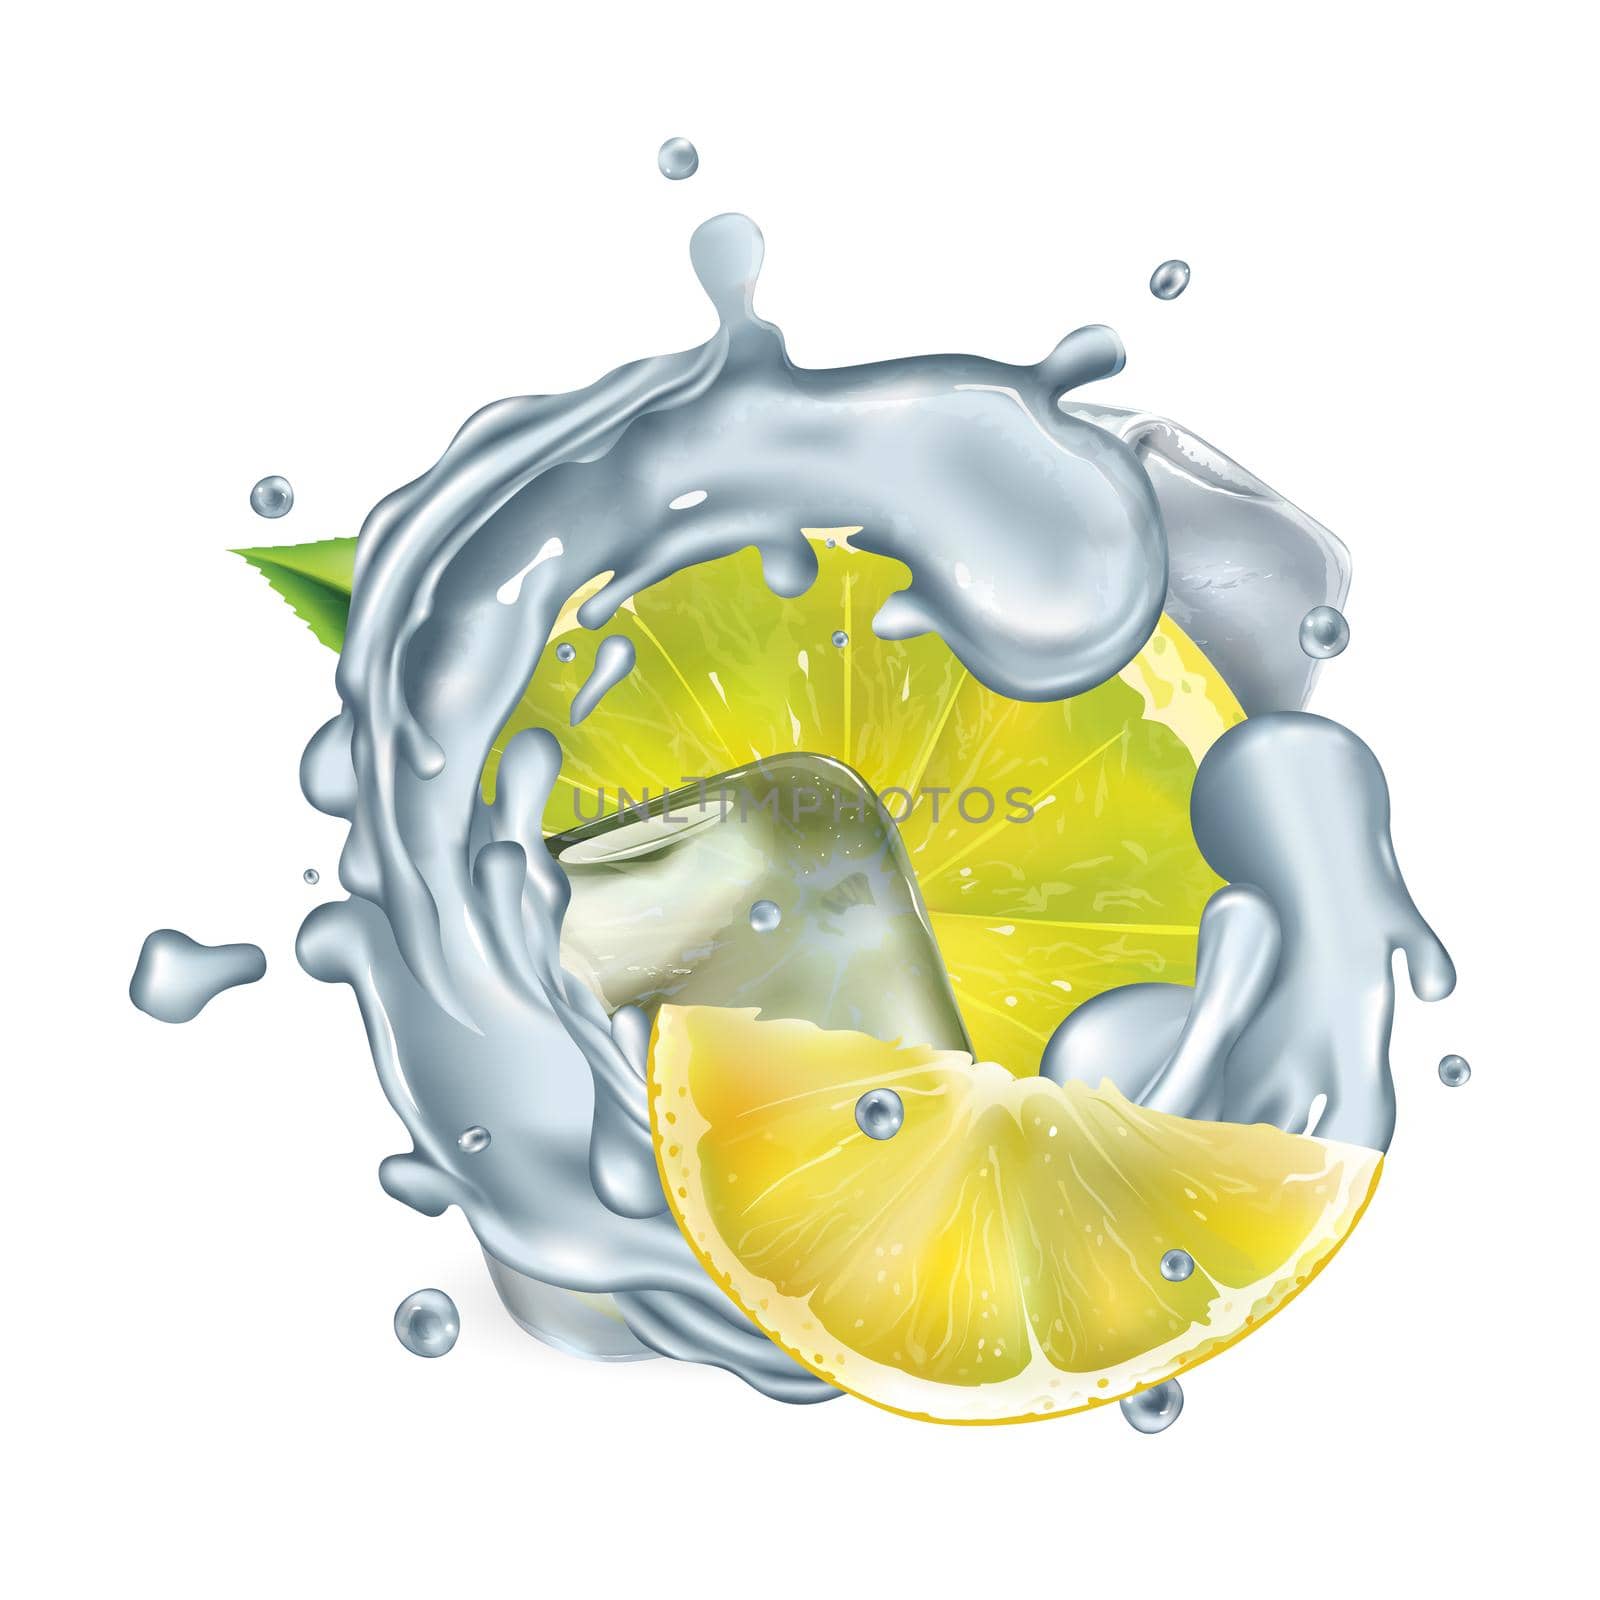 Fresh lemon slices in water splash with ice cubes by ConceptCafe